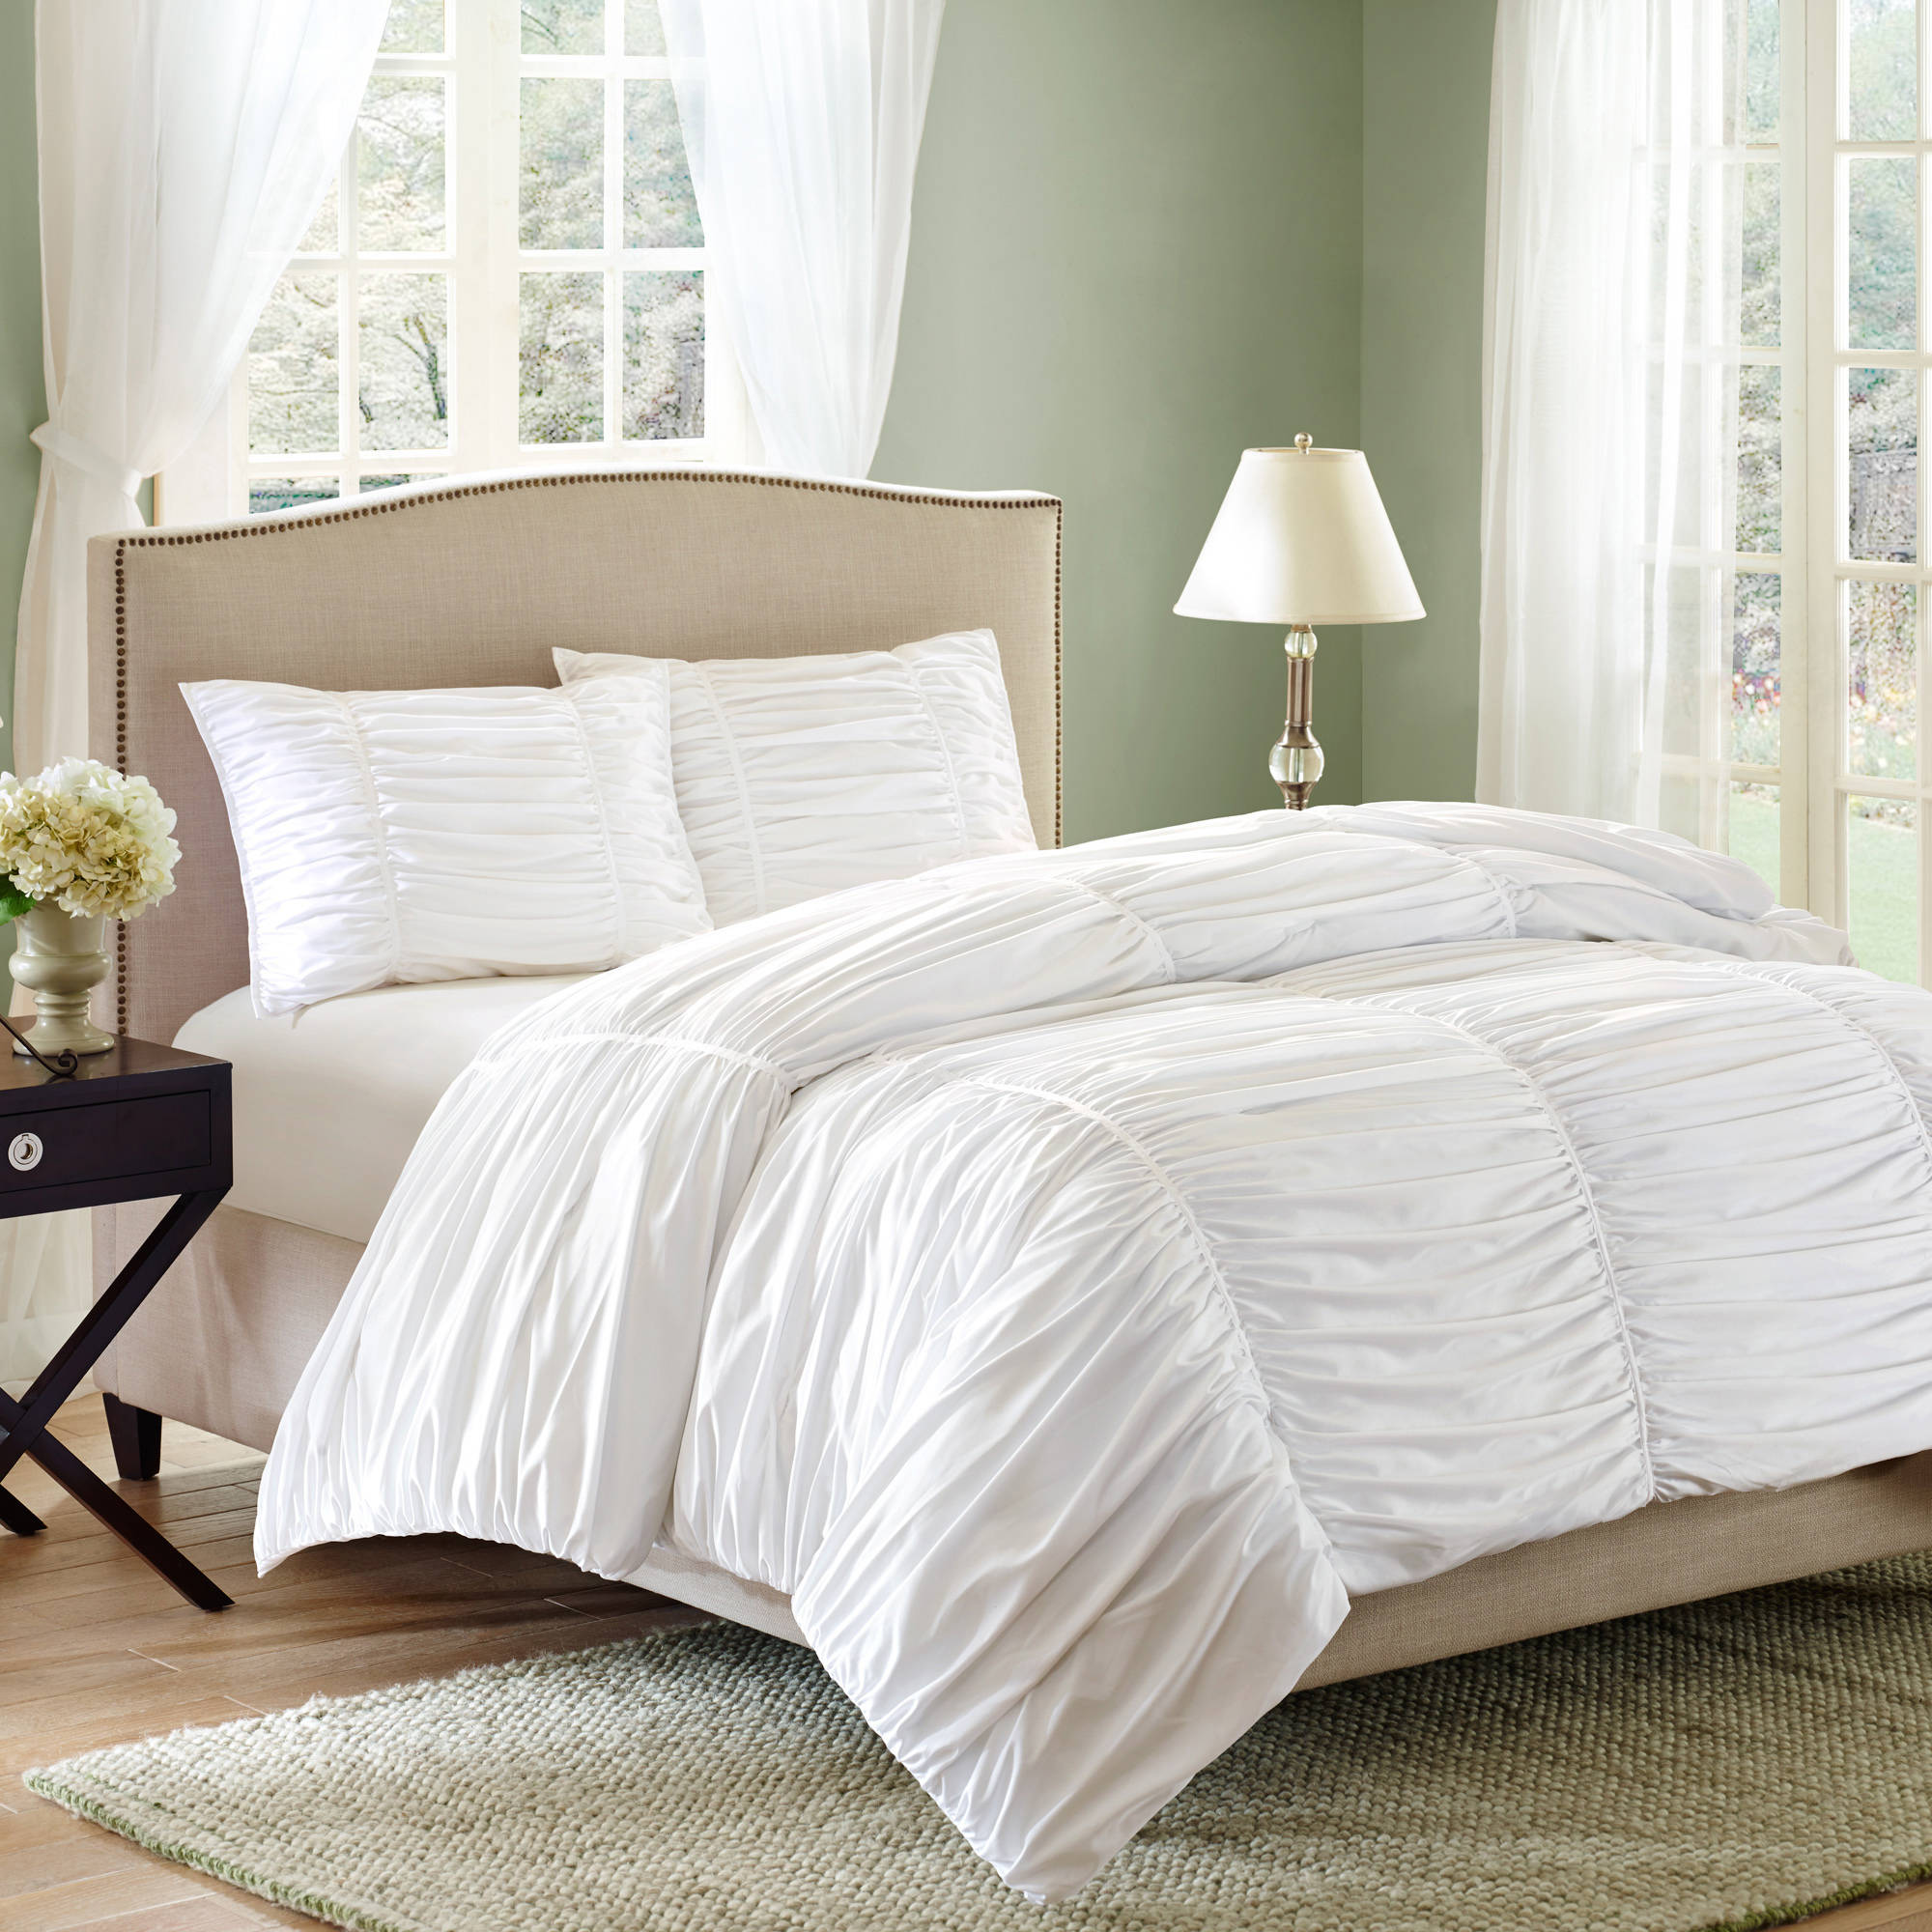 Better Homes & Gardens Full or Queen Ruching Comforter Set, 3 Piece - image 1 of 3